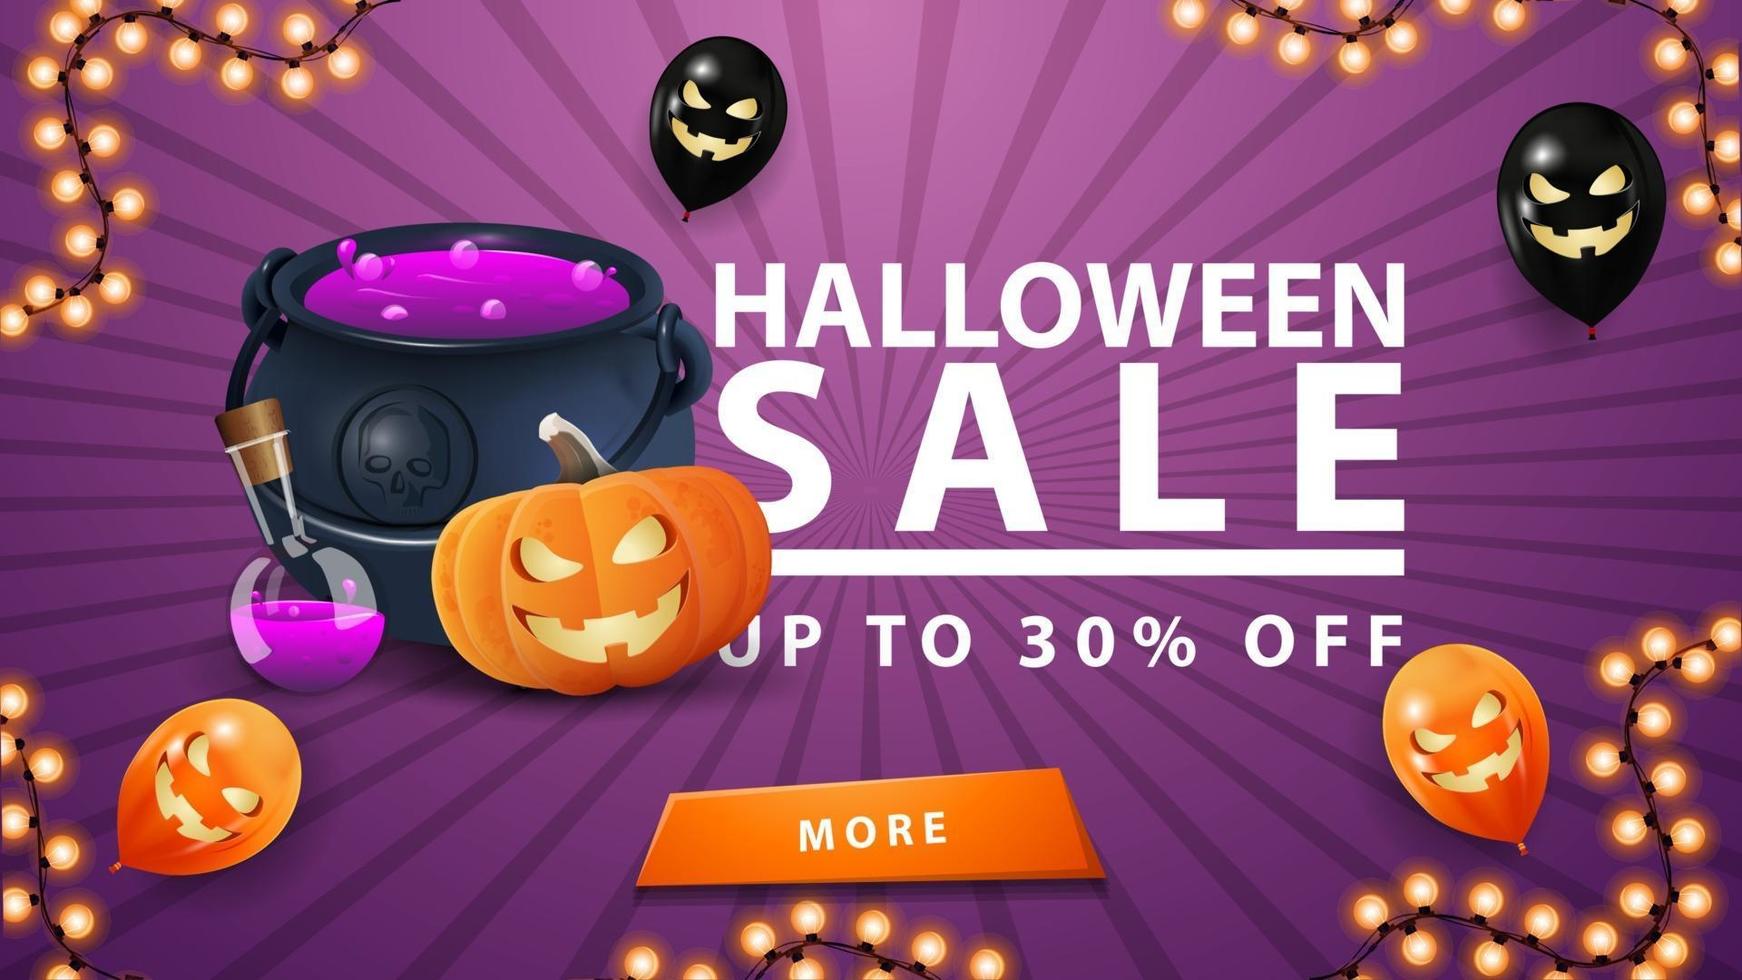 Halloween sale, up to 30 off, discount purple banner with button, halloween balloons, witch's cauldron and pumpkin Jack vector